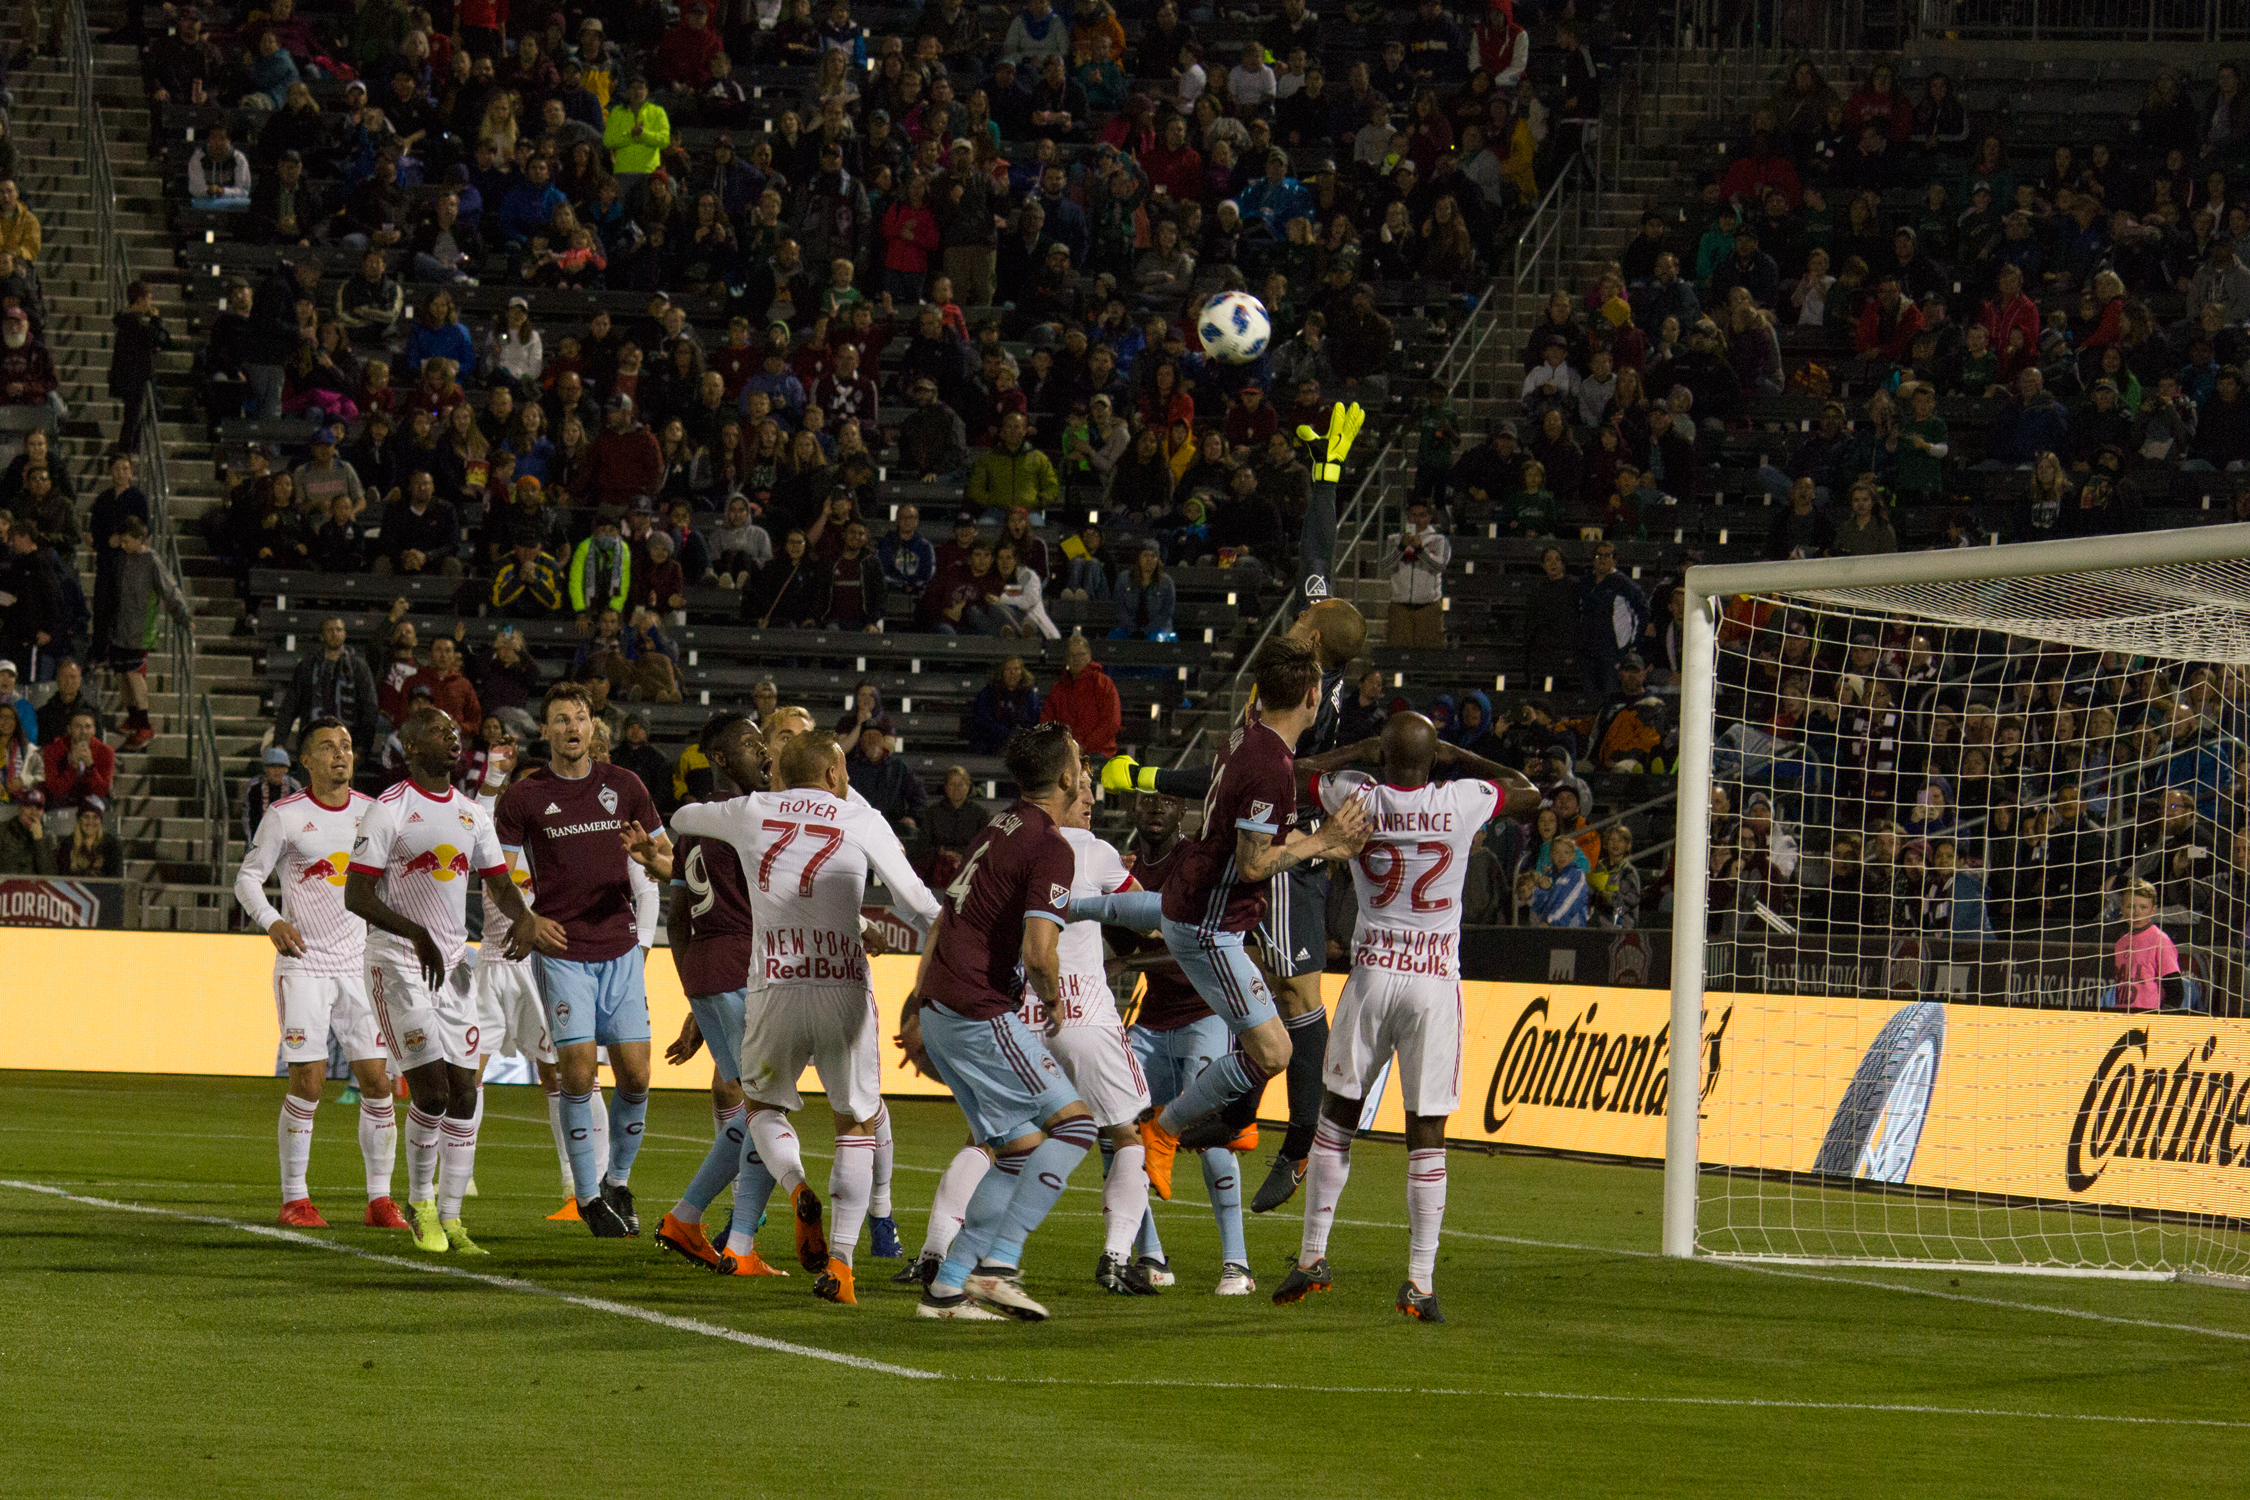 Colorado Rapids vs. the New York Red Bulls at Dick's Sporting Goods Park on 05/12/18. Photo by: Matthew McGuire